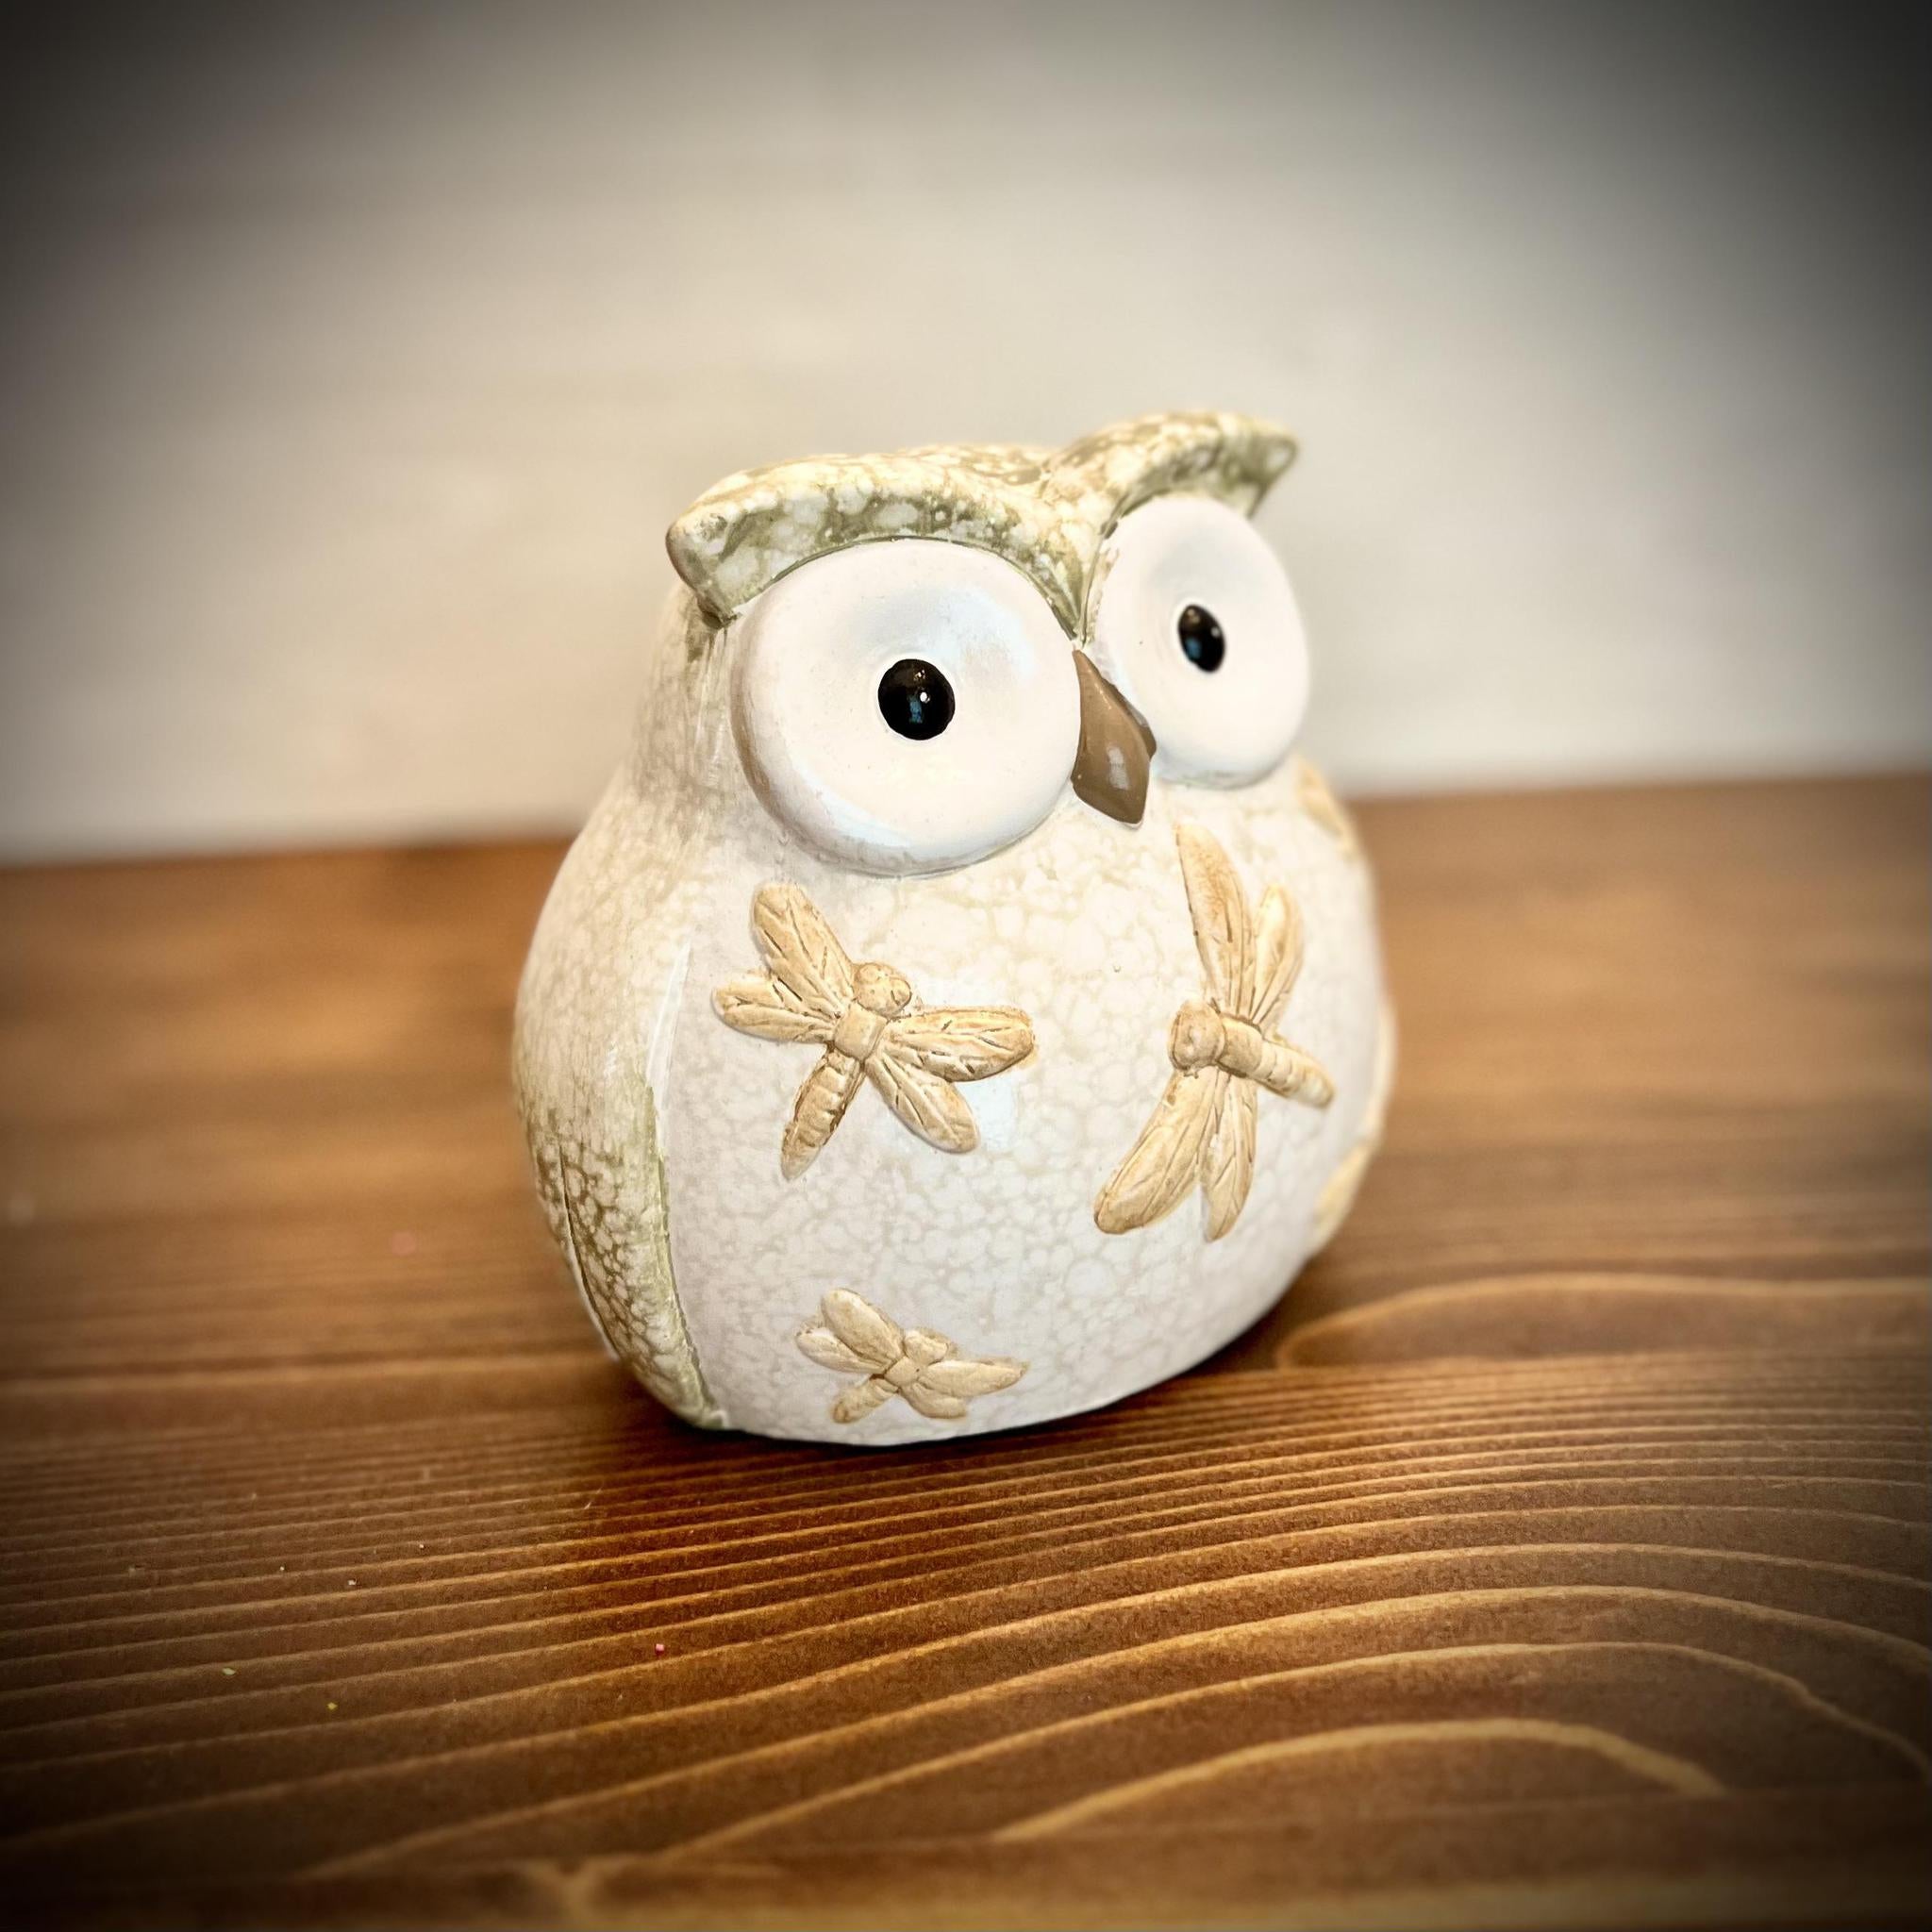 Ceramic Owl with Dragonflies - Short - 5.5"H